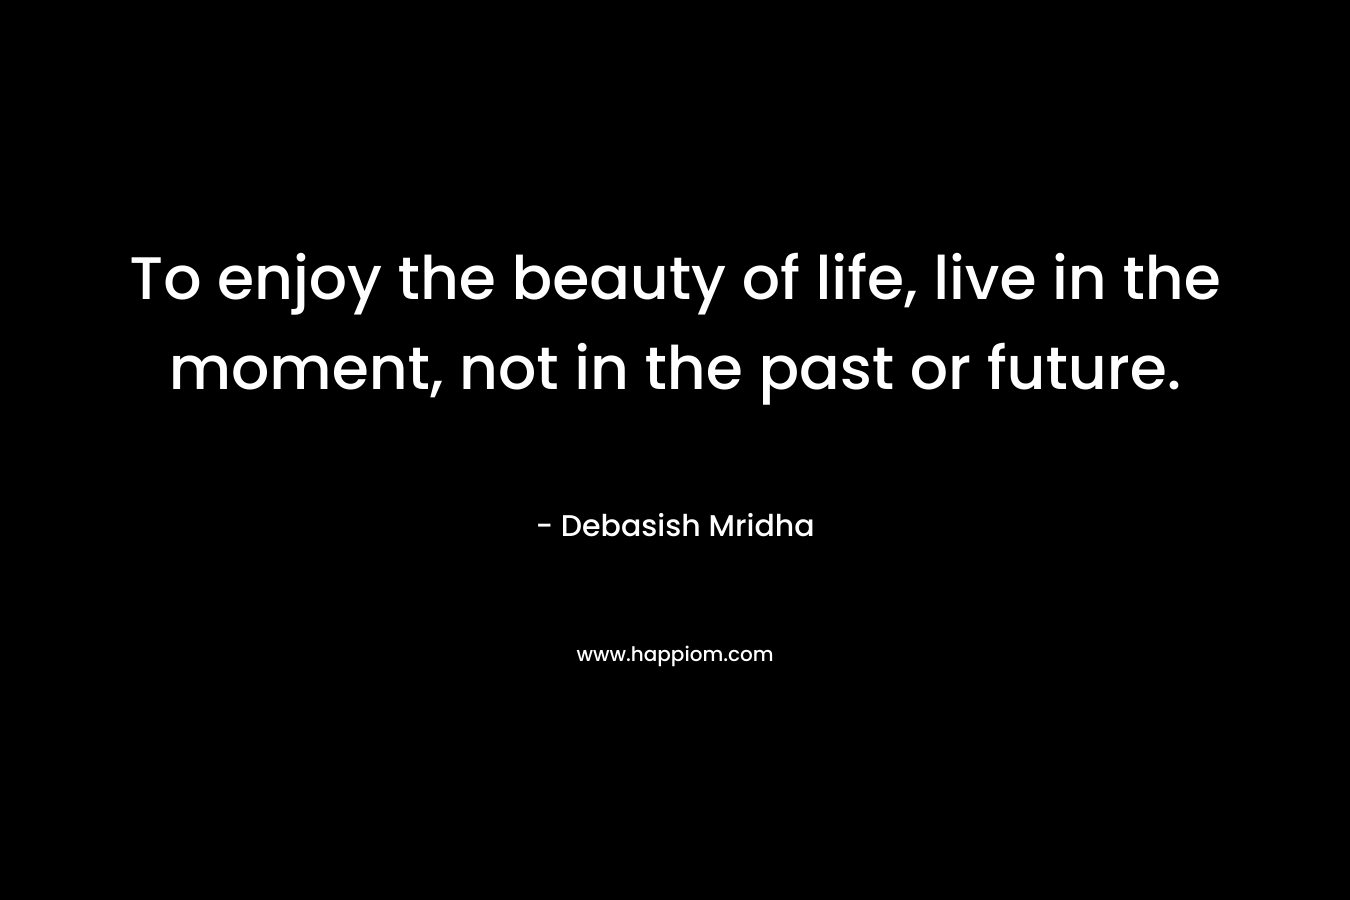 To enjoy the beauty of life, live in the moment, not in the past or future.